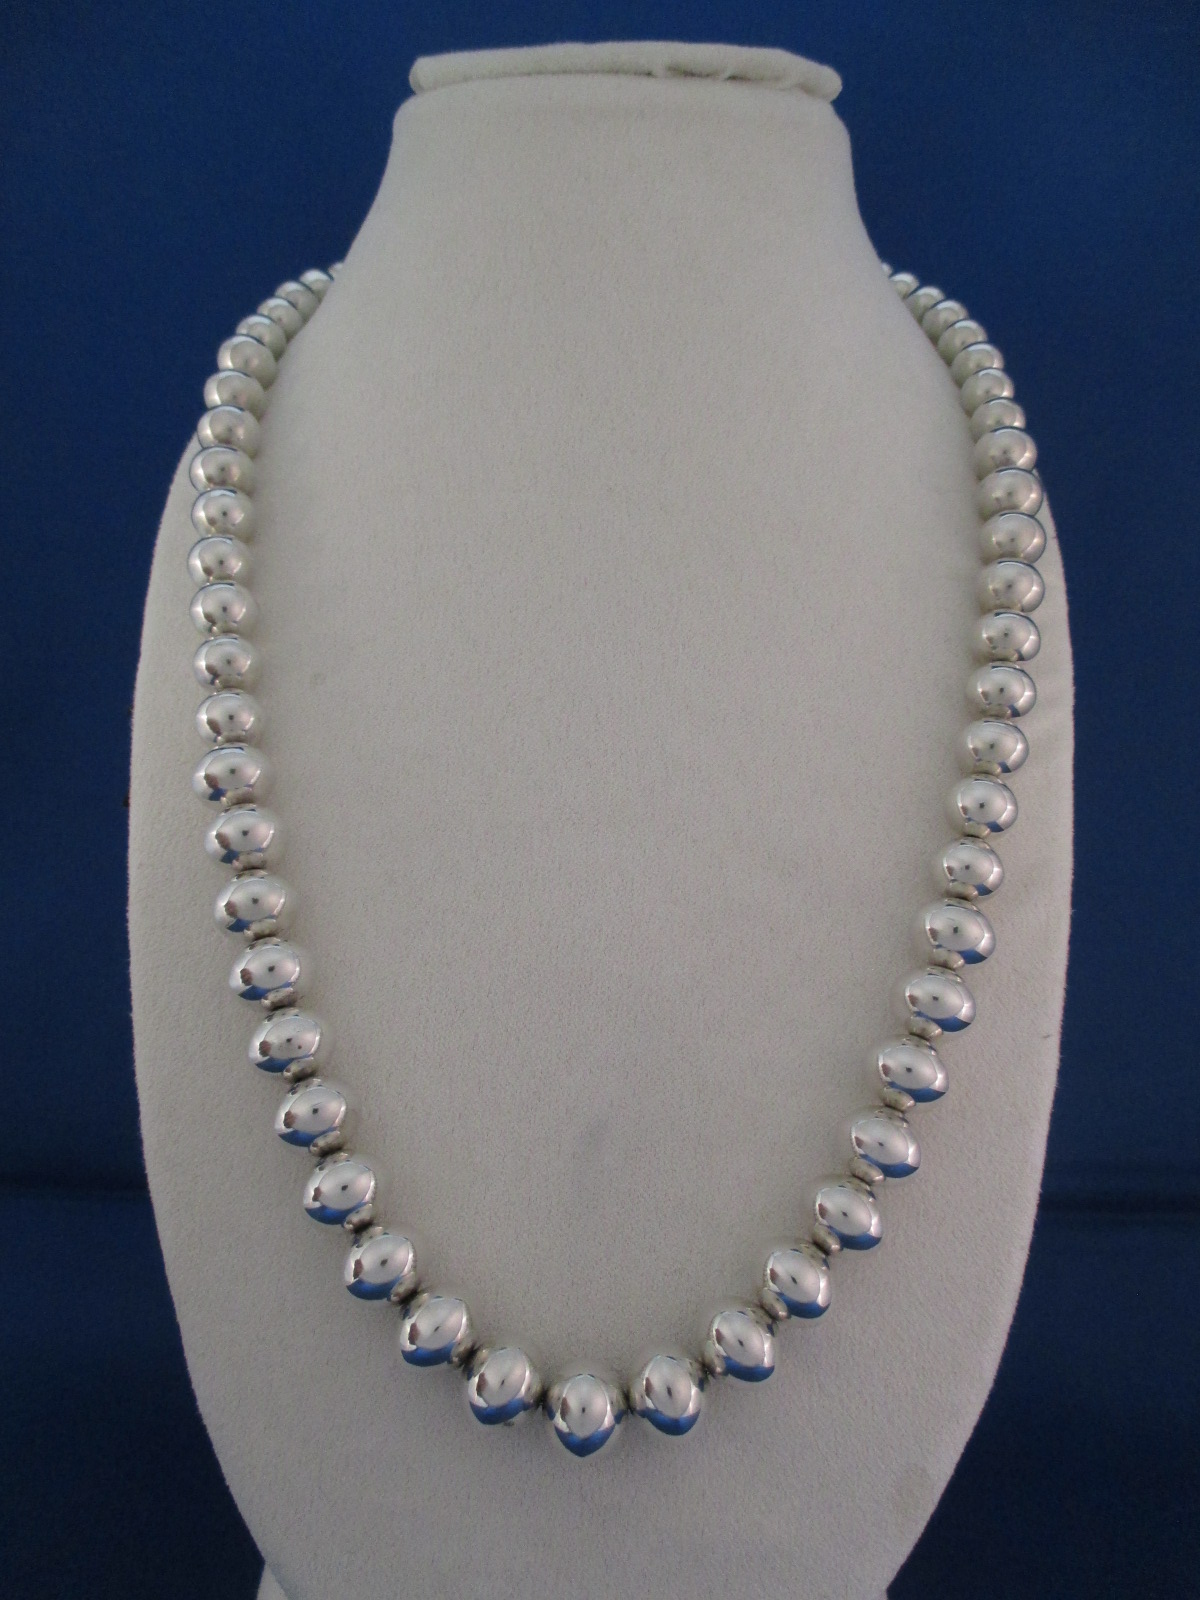 Polished Sterling Silver Bead Necklace 